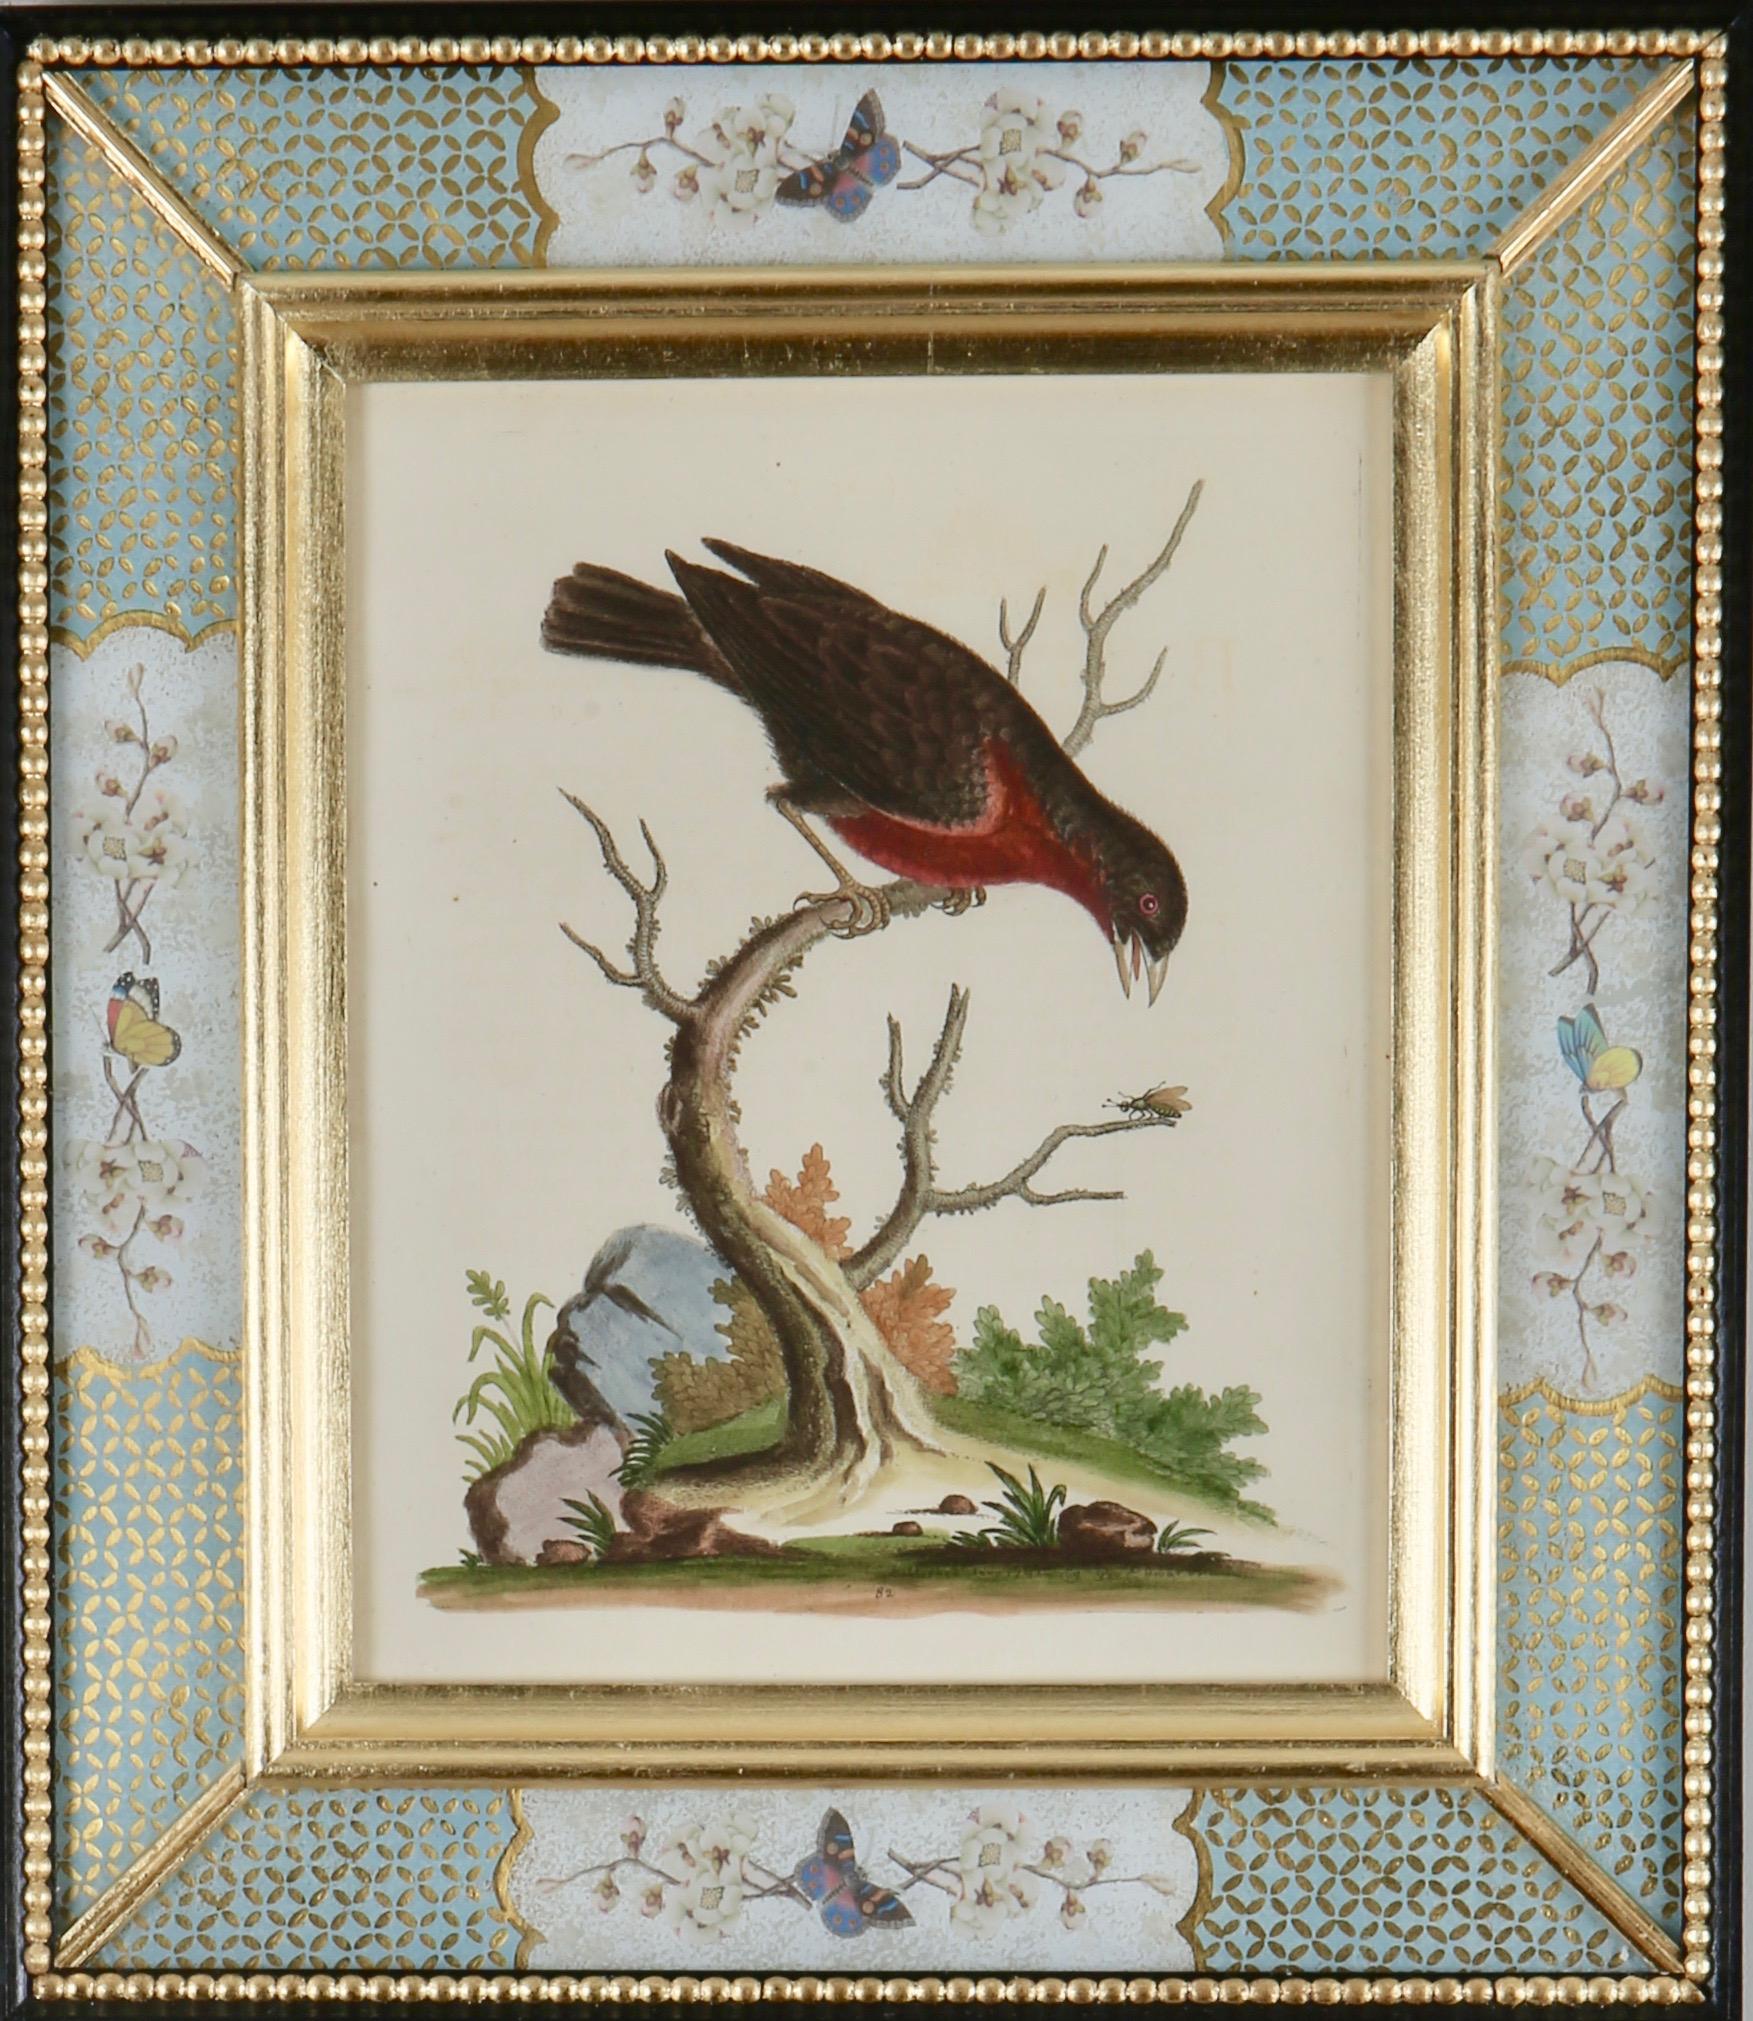 George Edwards: ""A History of Uncommon Birds"", 1749-1761.

A prominent English naturalist and ornithologist, George Edwards (1694 -1773) is best known for his work, ""A Natural History of Uncommon Birds"", which he published between 1743 and 1761